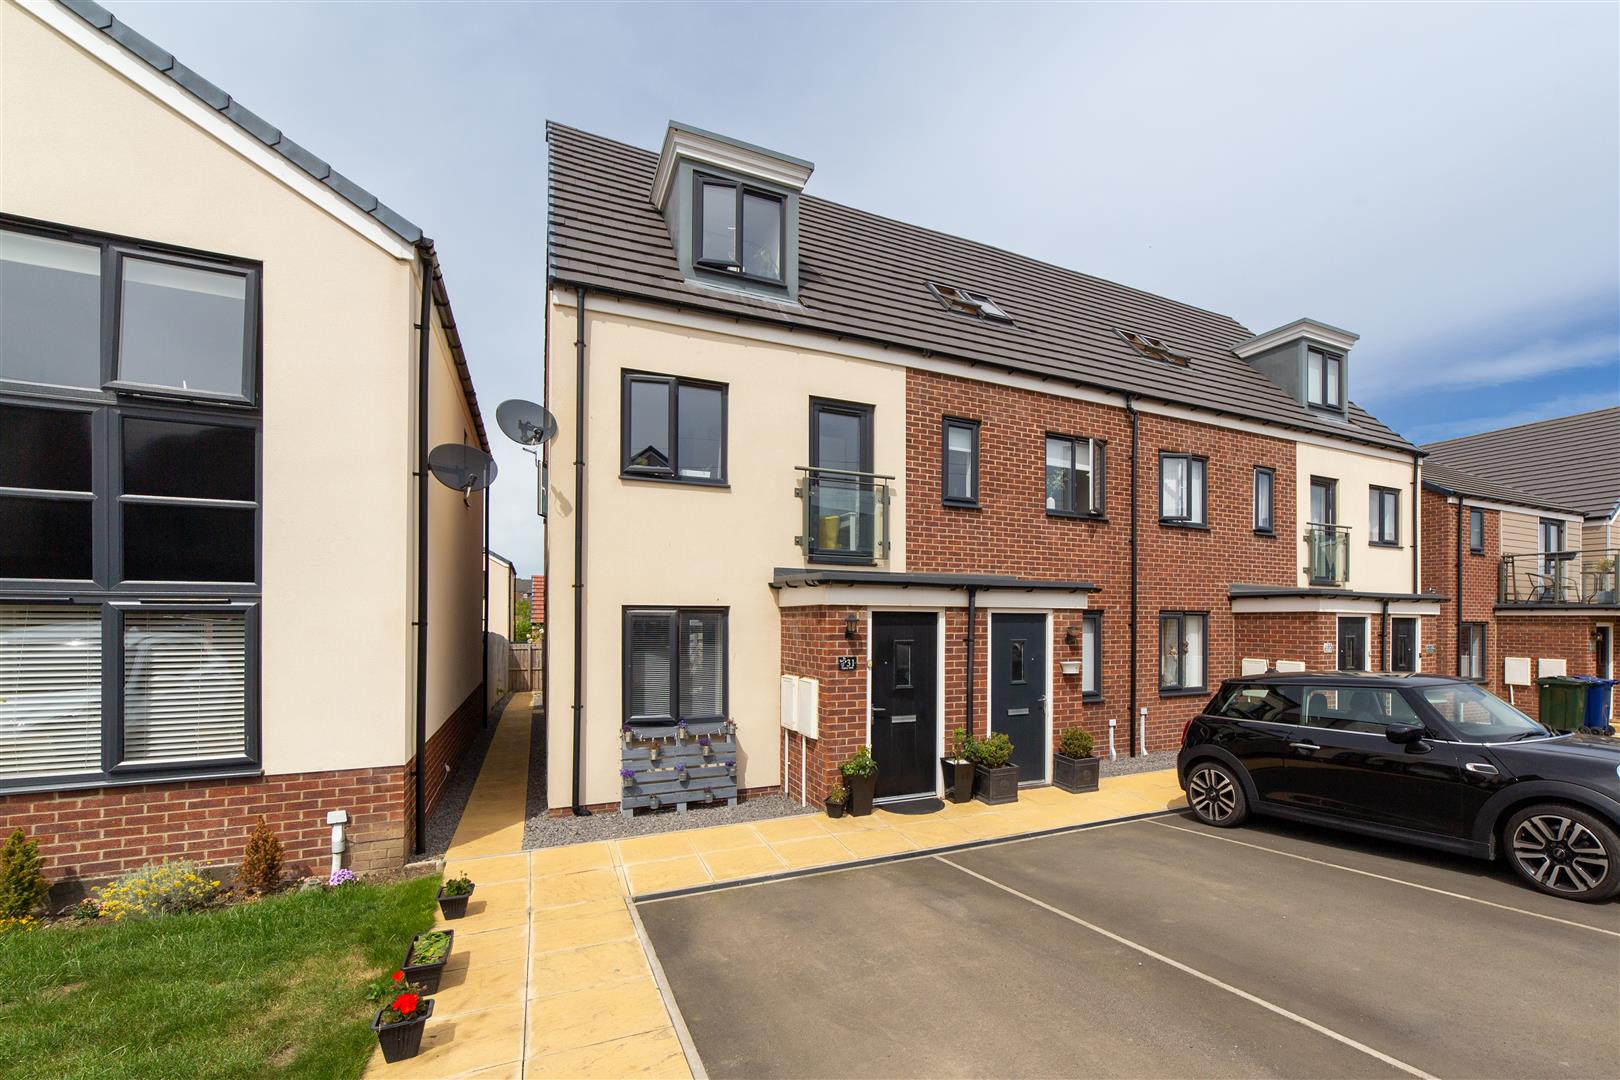 3 bed town house for sale in Osprey Walk, Great Park, NE13